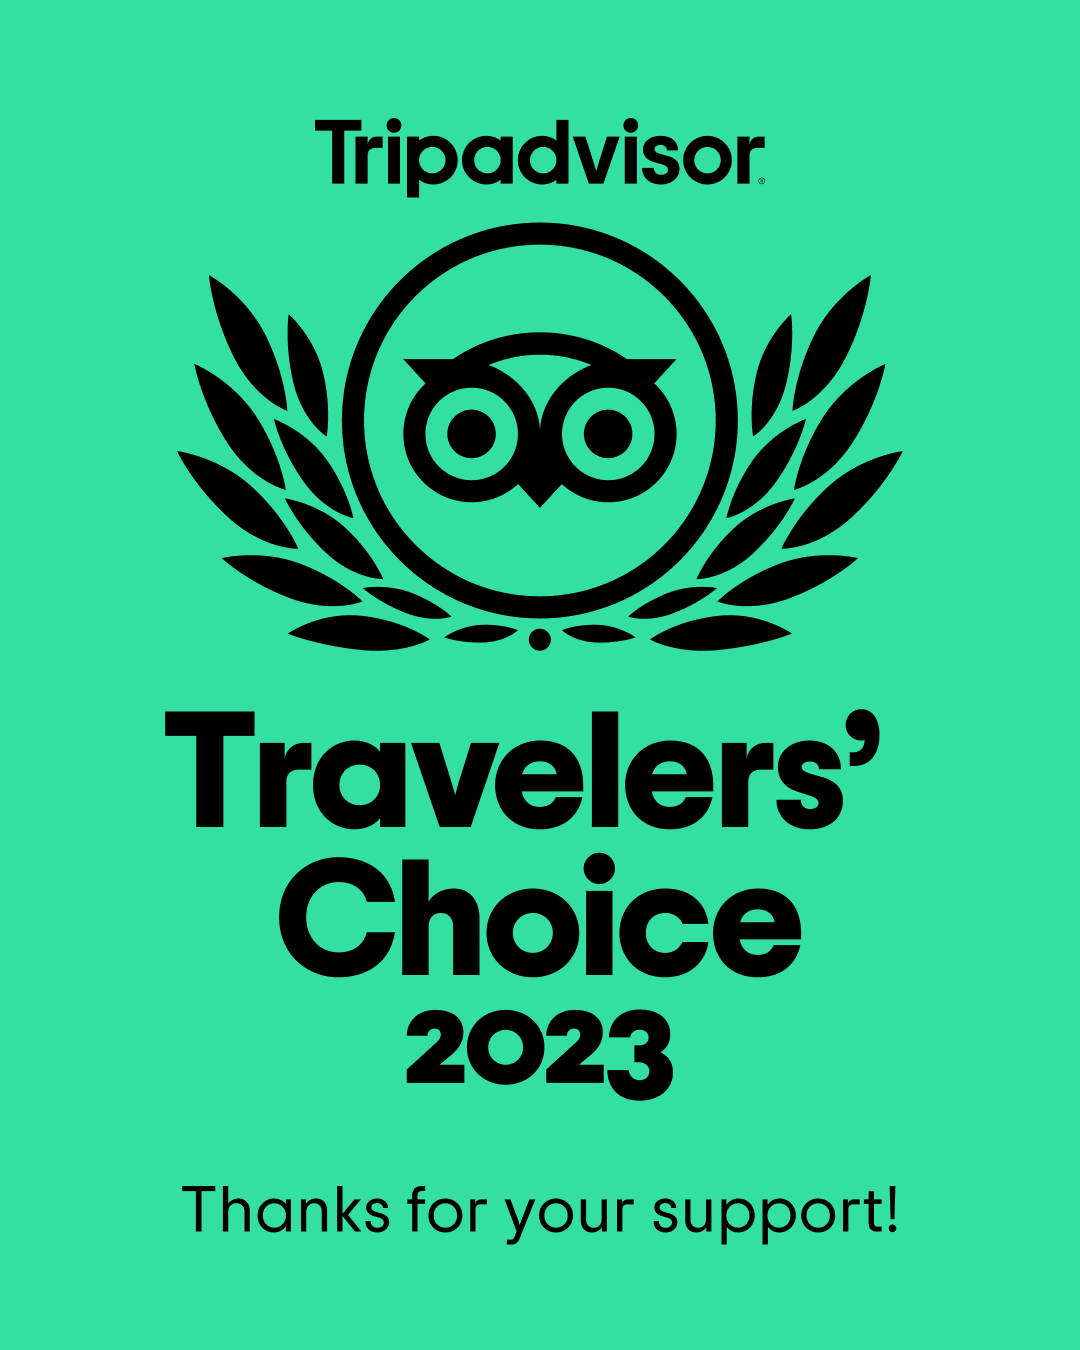 Picture of the Chilli Ranch TripAdvisor Travelers' Choice Award 2023